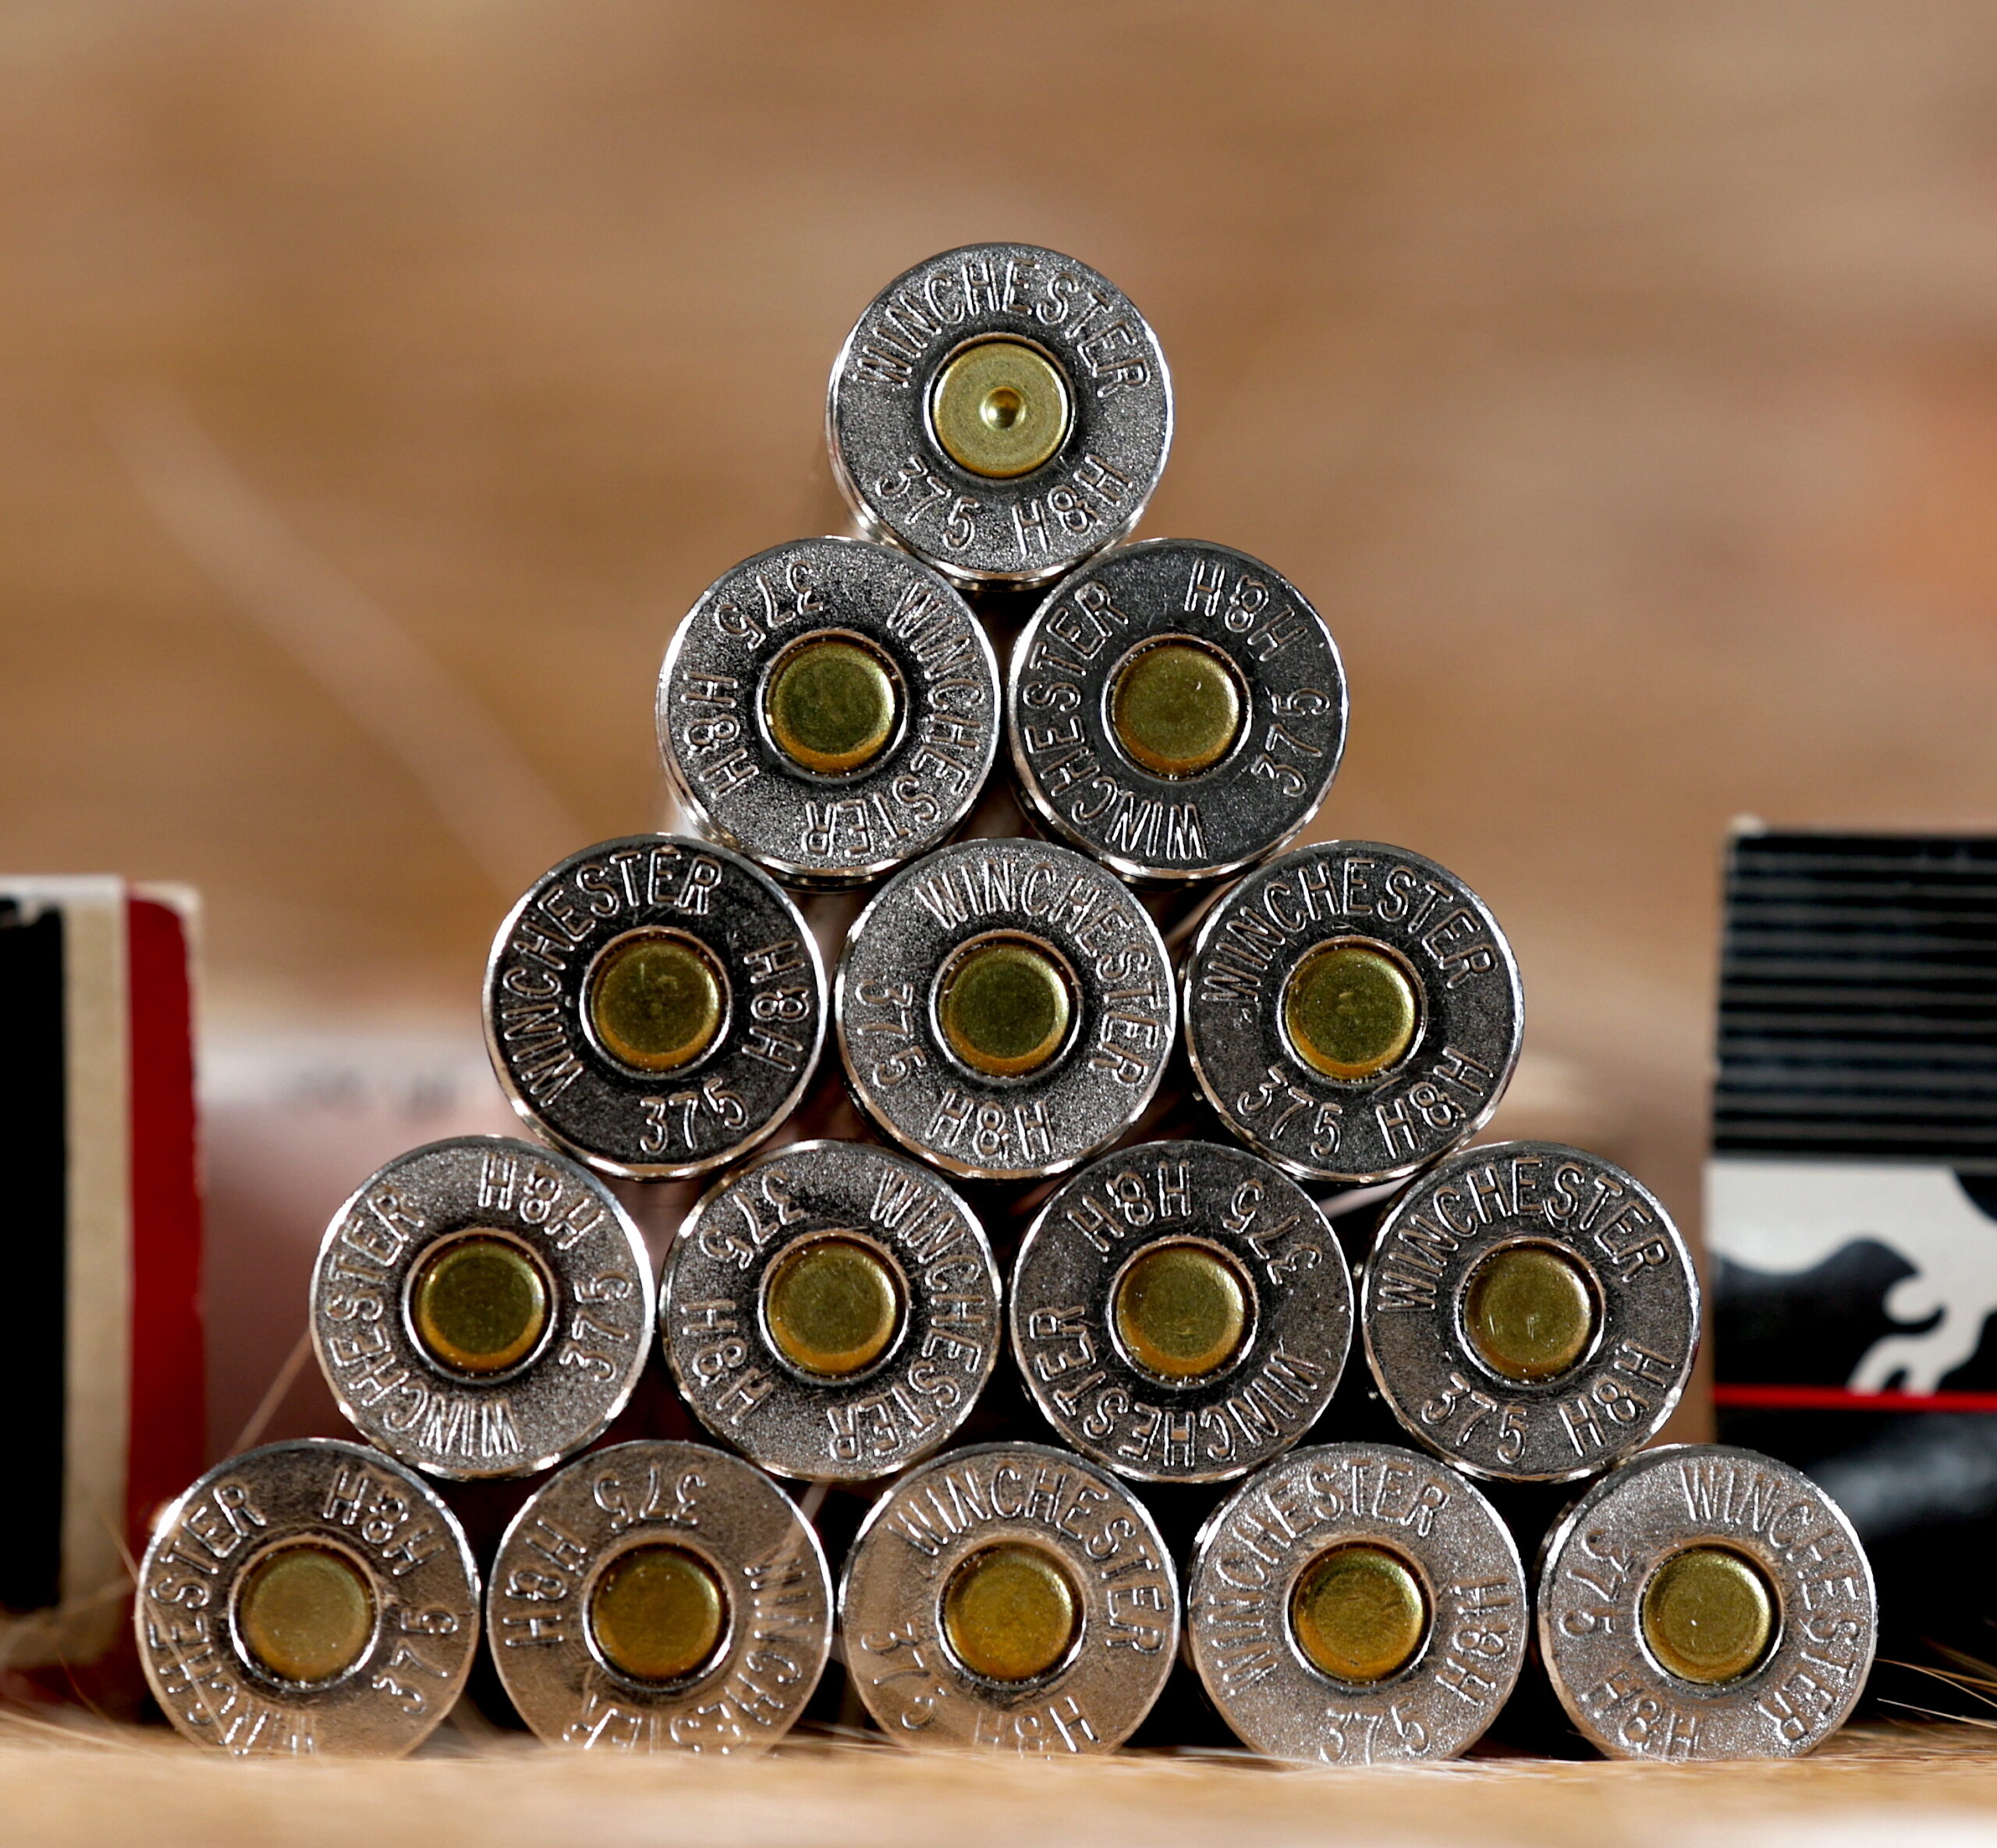 Gas Cartridges (9 products) compare prices today »